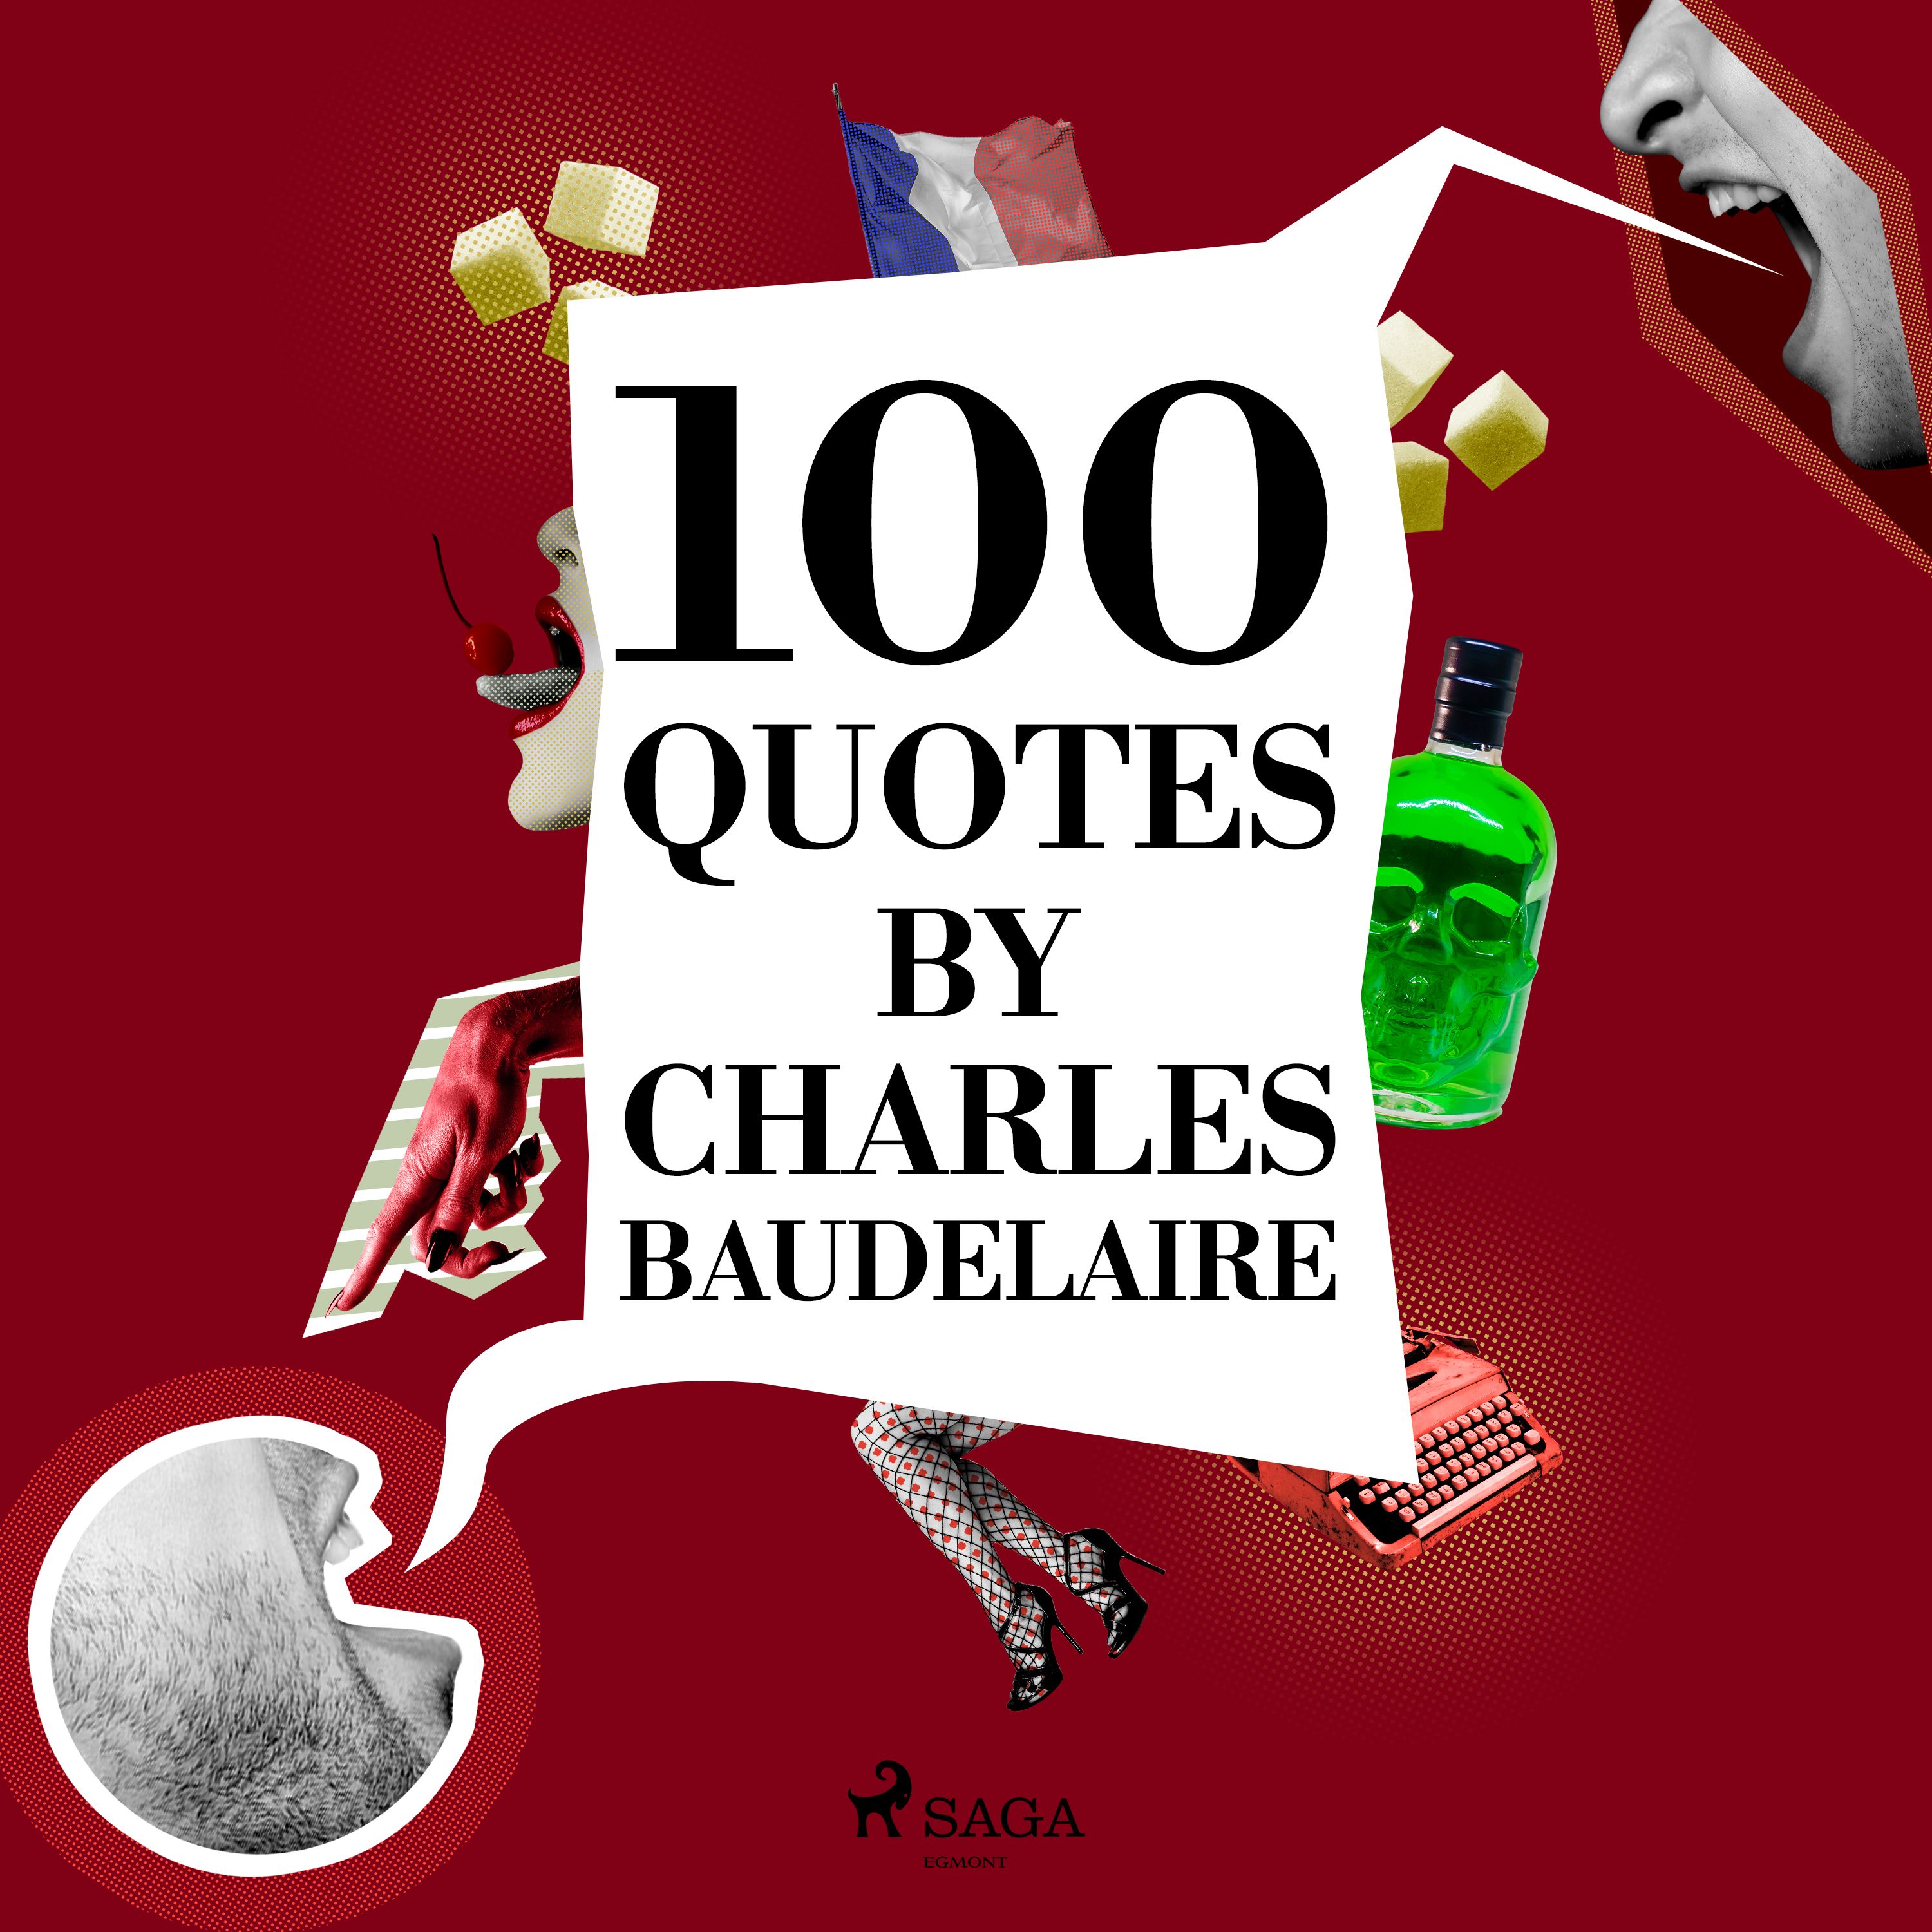 100 Quotes by Charles Baudelaire, audiobook by Charles Baudelaire